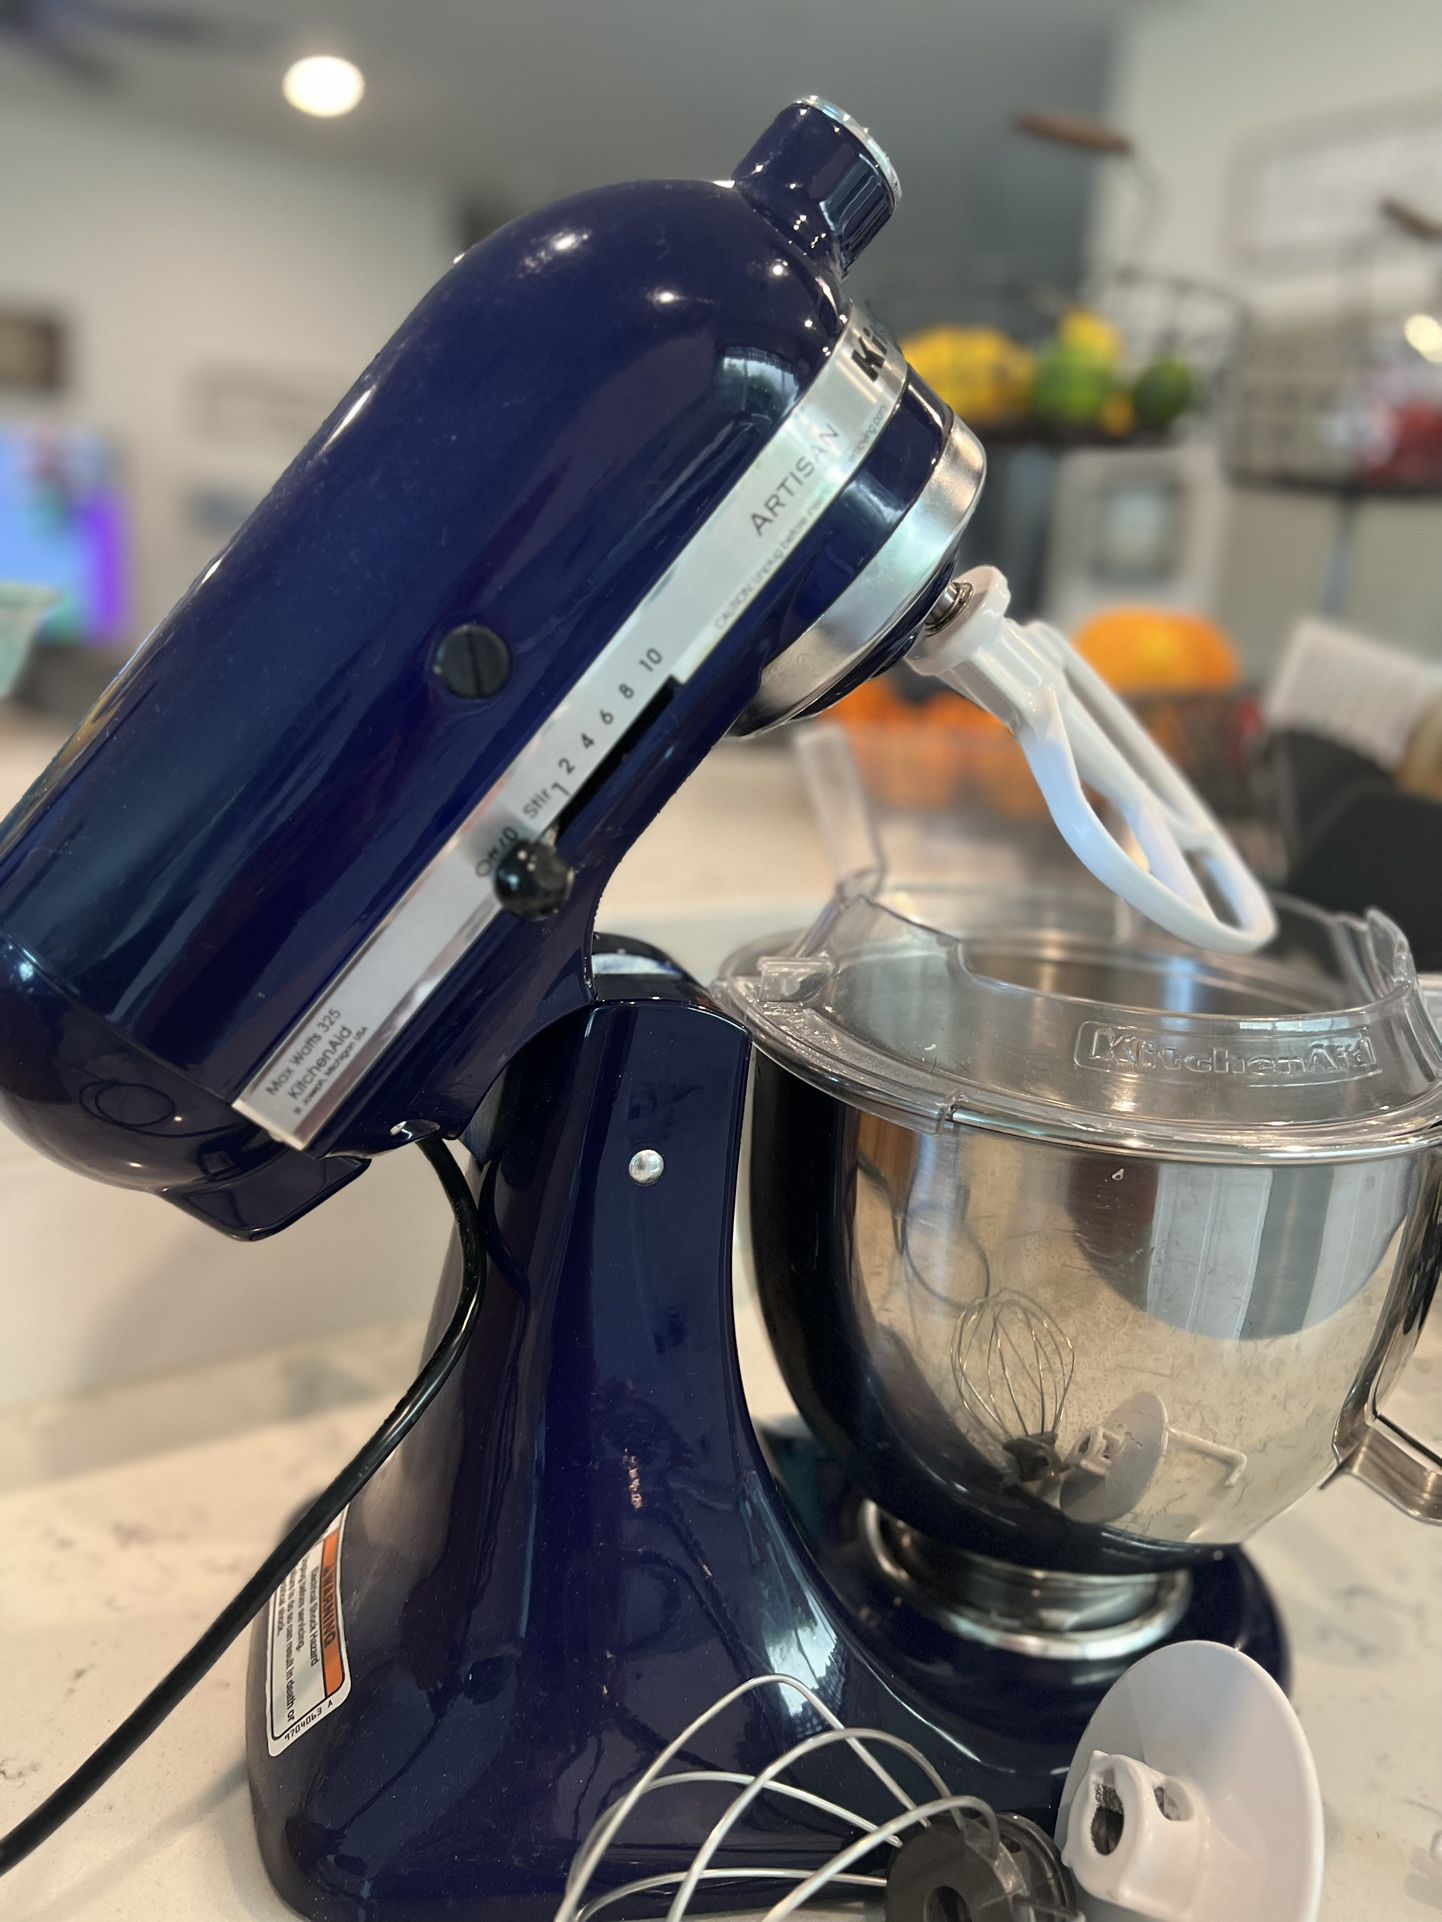 KitchenAid 5 Quart Tilt Head Stand Mixer Green Apple for Sale in  Bakersfield, CA - OfferUp